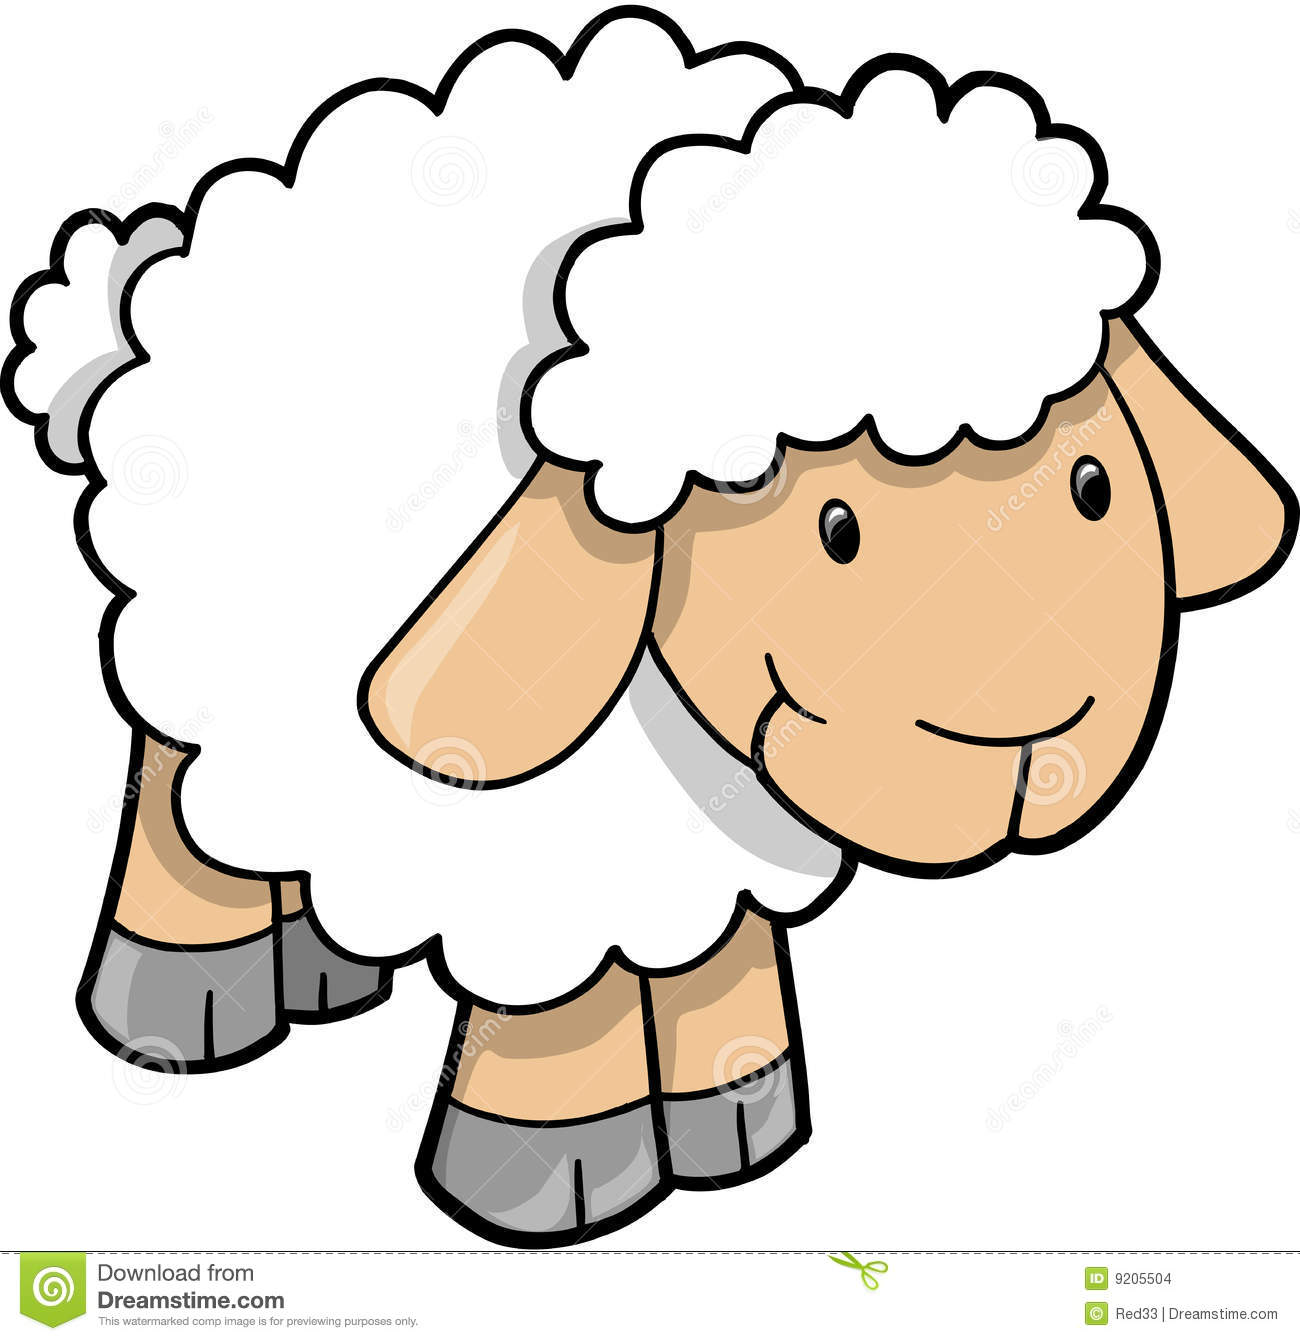 Sheep clipart and illustratio